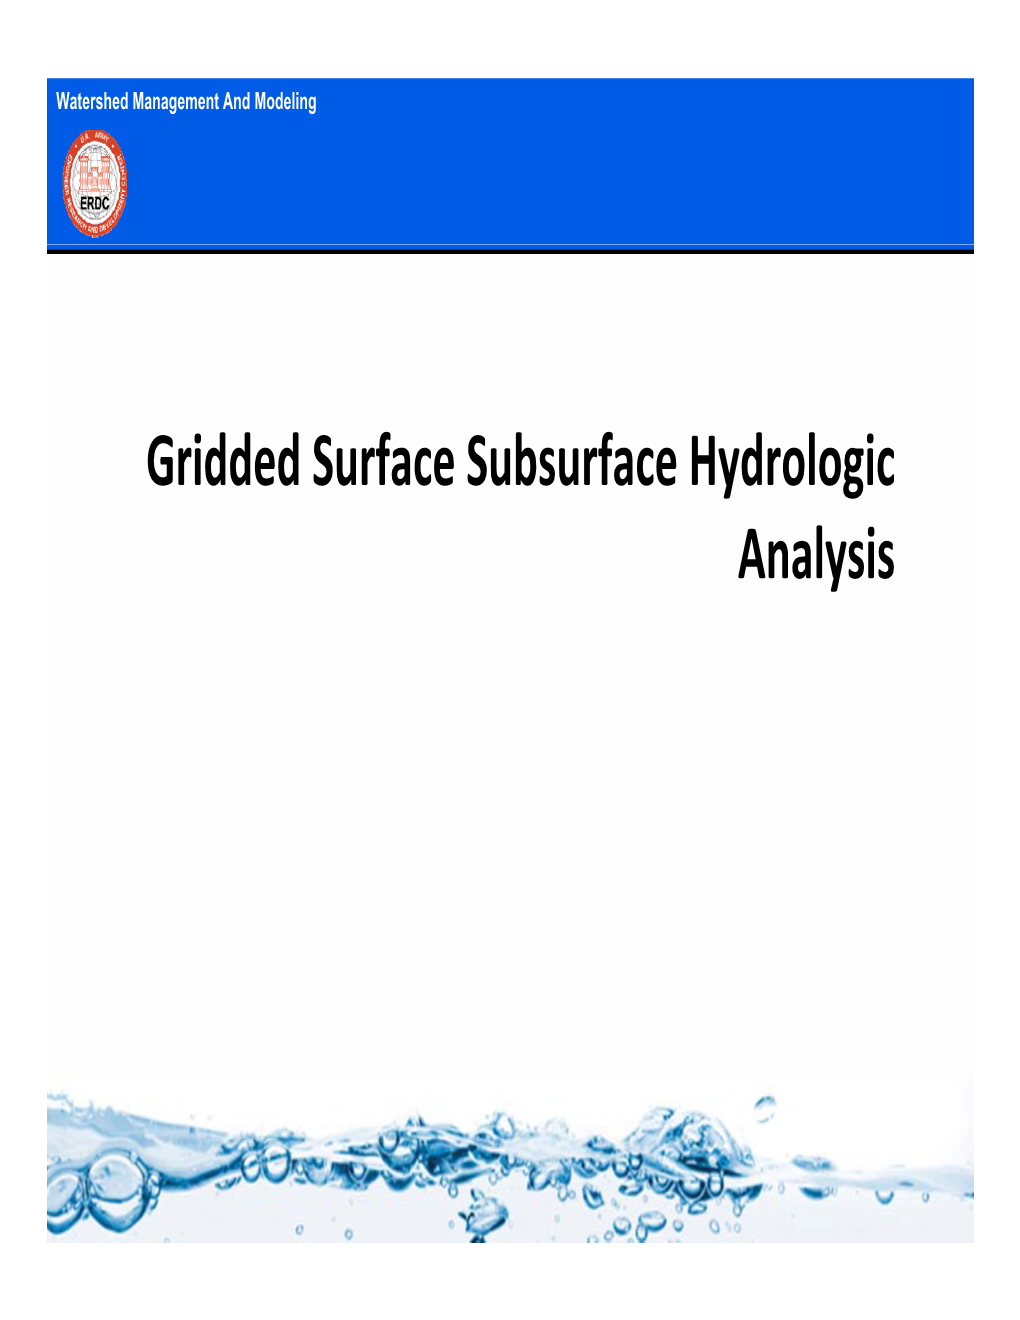 Gridded Surface Subsurface Hydrologic Analysis Watershed Management and Modeling What Is GSSHA?